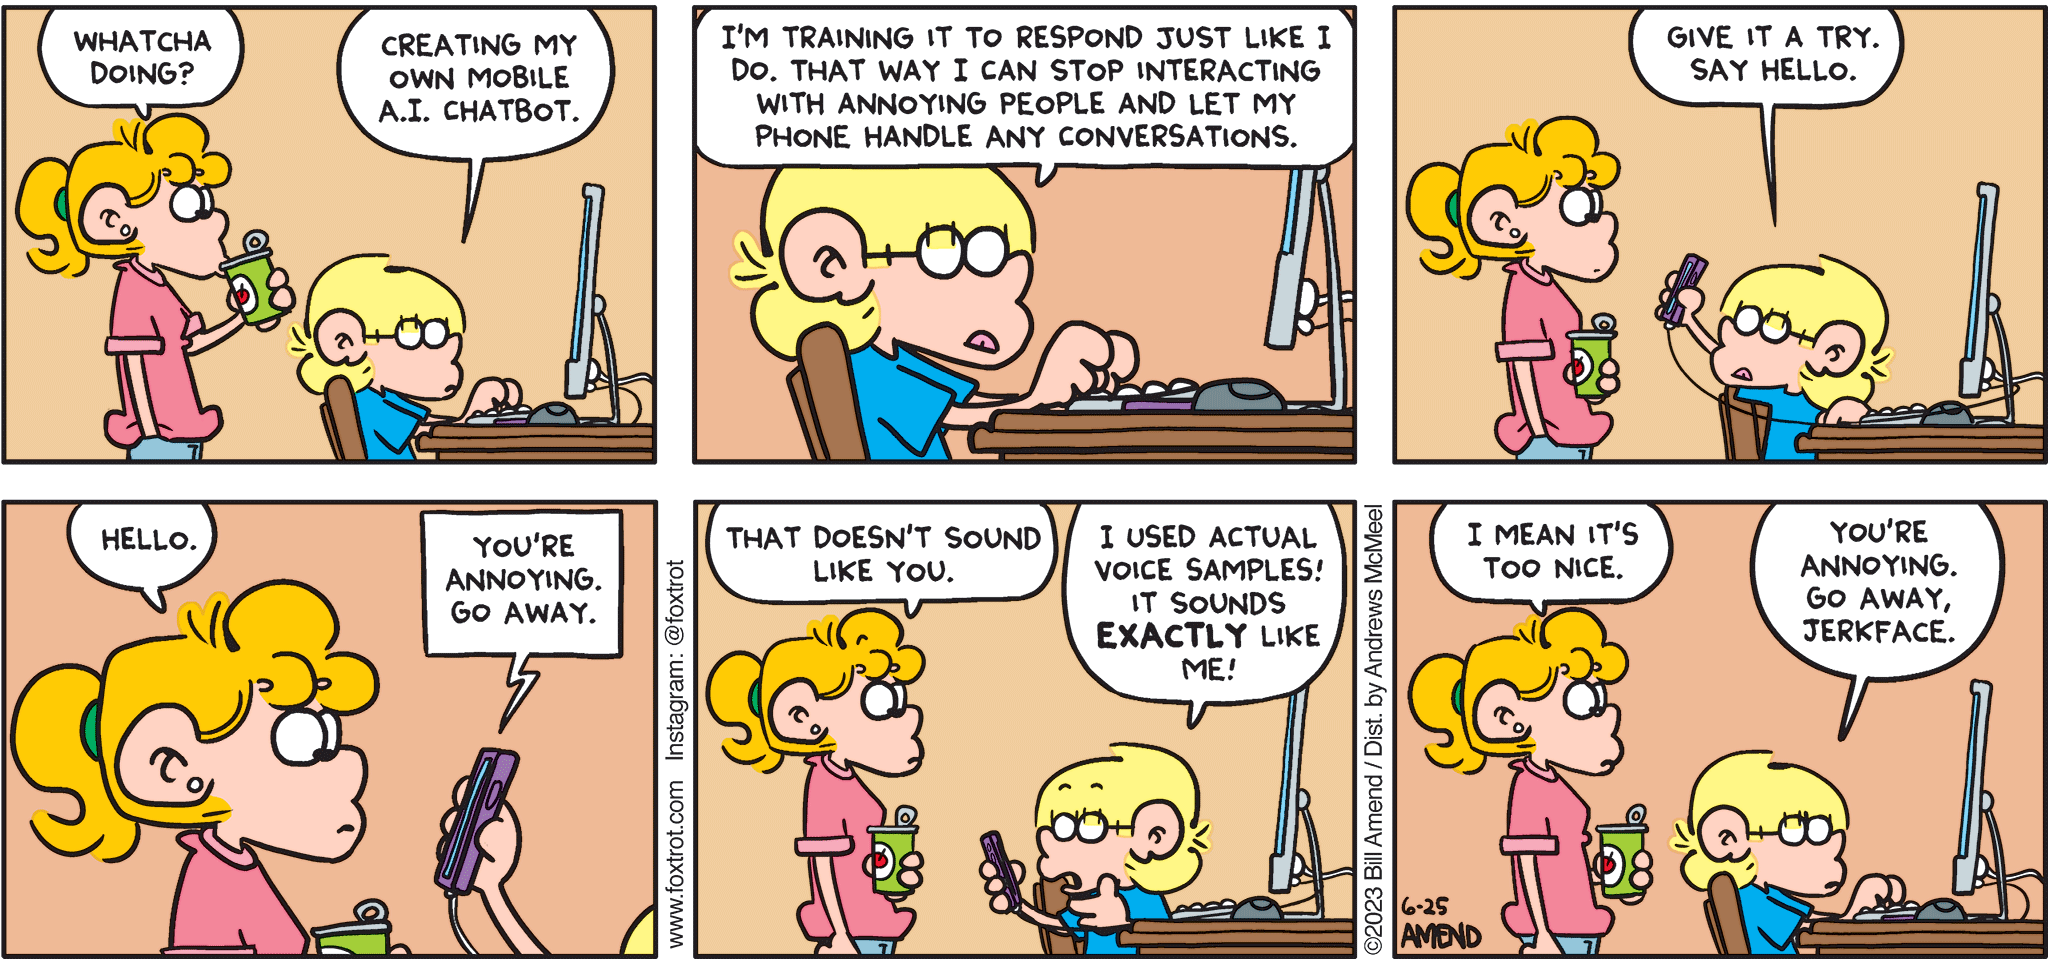 FoxTrot comic strip by Bill Amend - "ChatJF" published June 25, 2023 - Transcript: Paige Fox: Whatcha doing? Jason Fox: Creating my own mobile A.I. chatbot. I'm training it to respond just like I do. That way I can stop interacting with annoying people and let my phone handle any conversations. Give it a try. Say hello. Paige Fox: Hello. A.I. Chatbot: You're annoying. Go away. Paige Fox: That doesn't sound like you. Jason Fox: I used actual voice samples! It sounds EXACTLY like me! Paige Fox: I mean it's too nice. Jason Fox: You're annoying. Go away, jerkface.